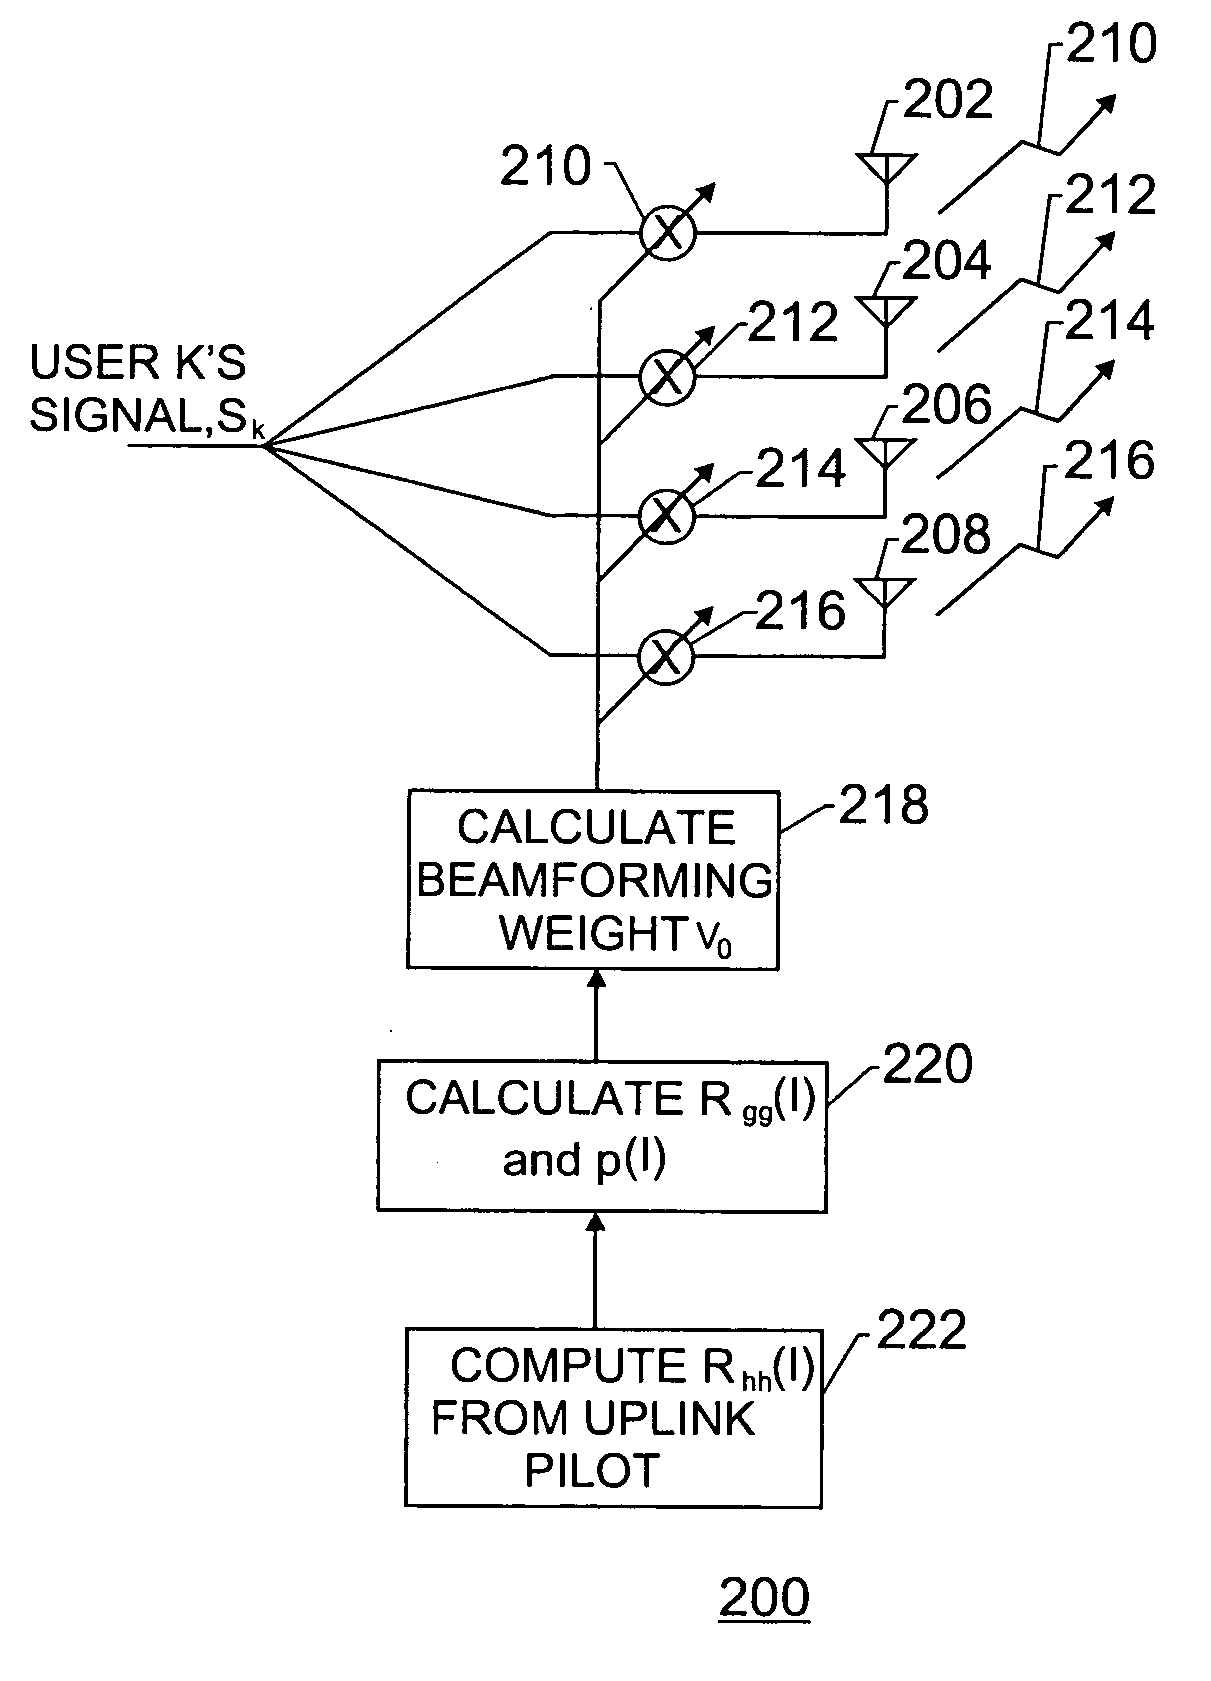 Method and apparatus for providing user specific downlink beamforming in a fixed beam network